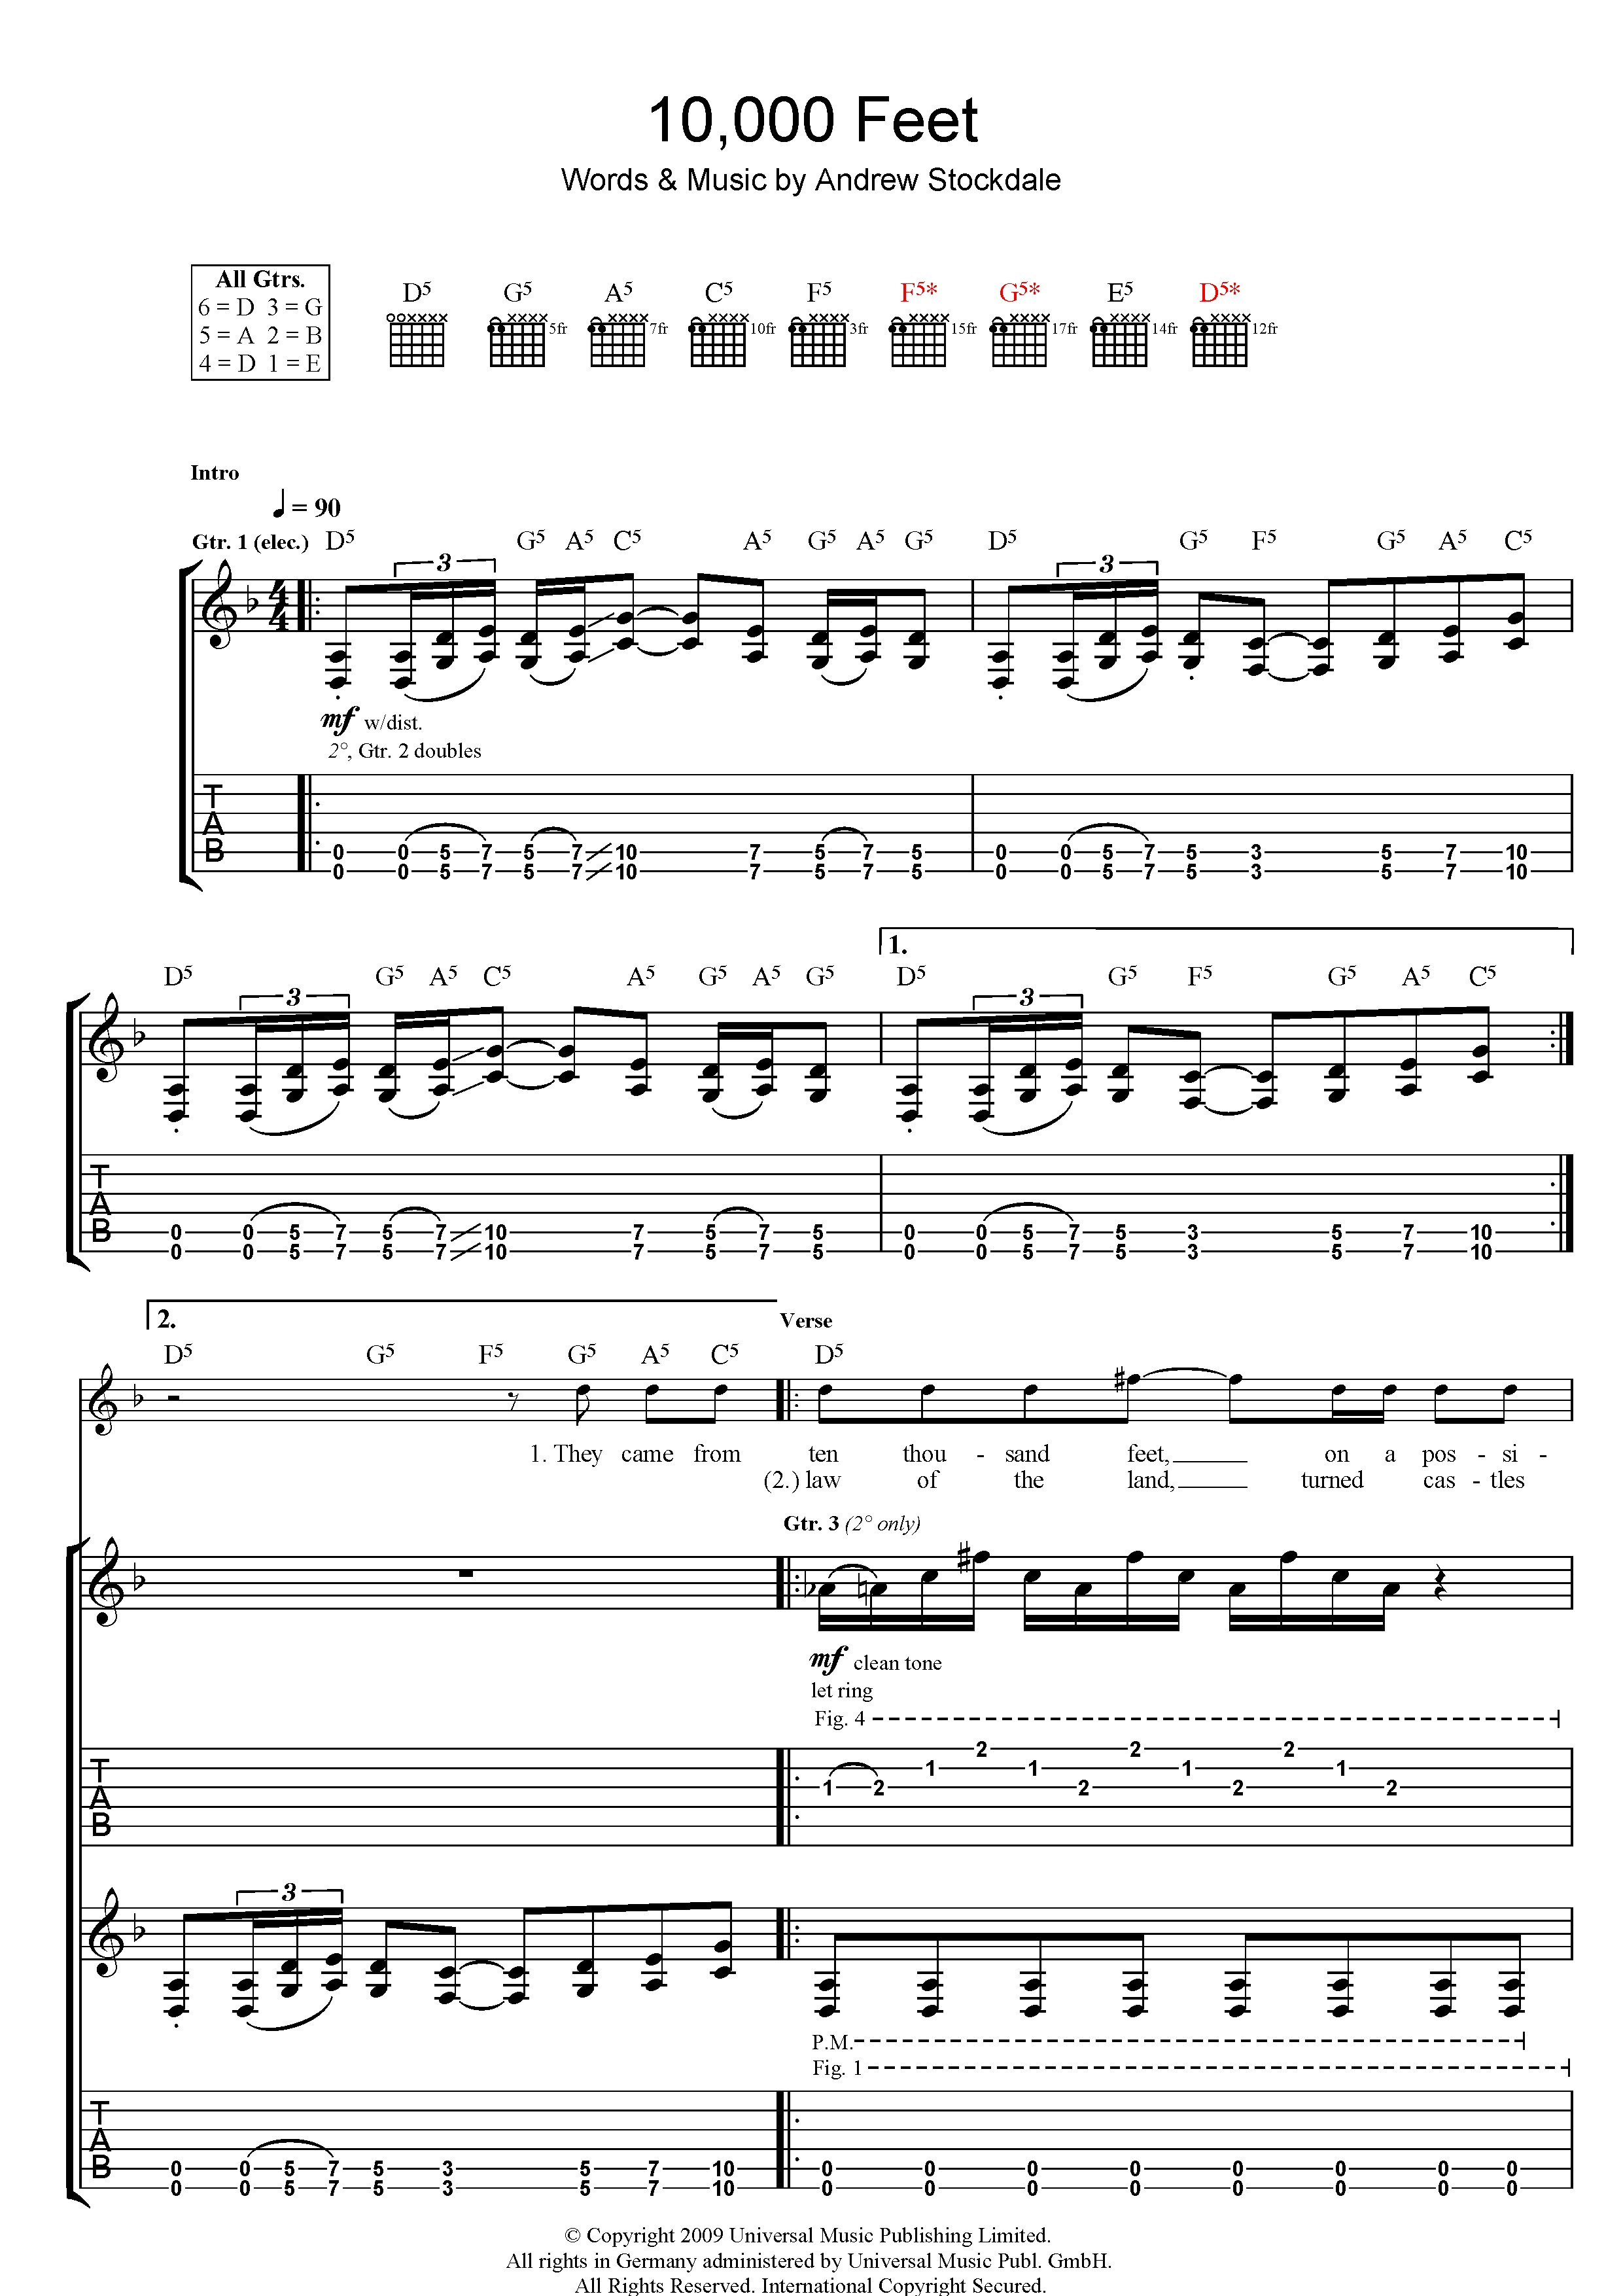 Download Wolfmother 10,000 Feet Sheet Music